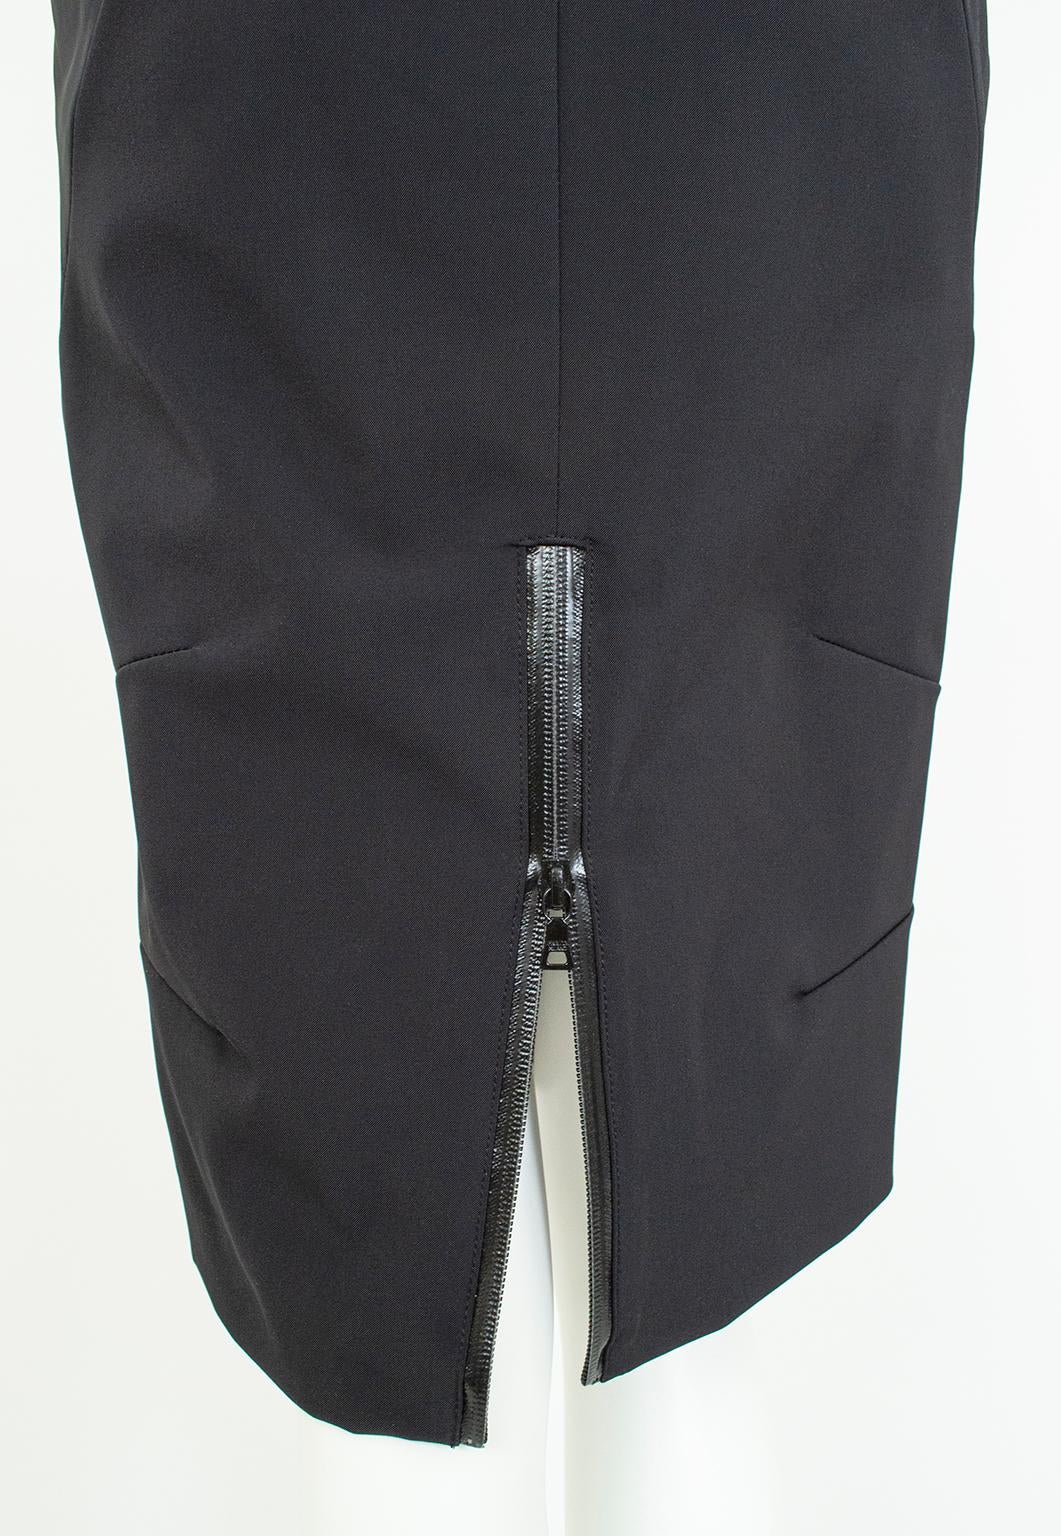 New Prada Black Corset-Seam Pencil Skirt with Vinyl Zippers and Vent – S, 2001 For Sale 3